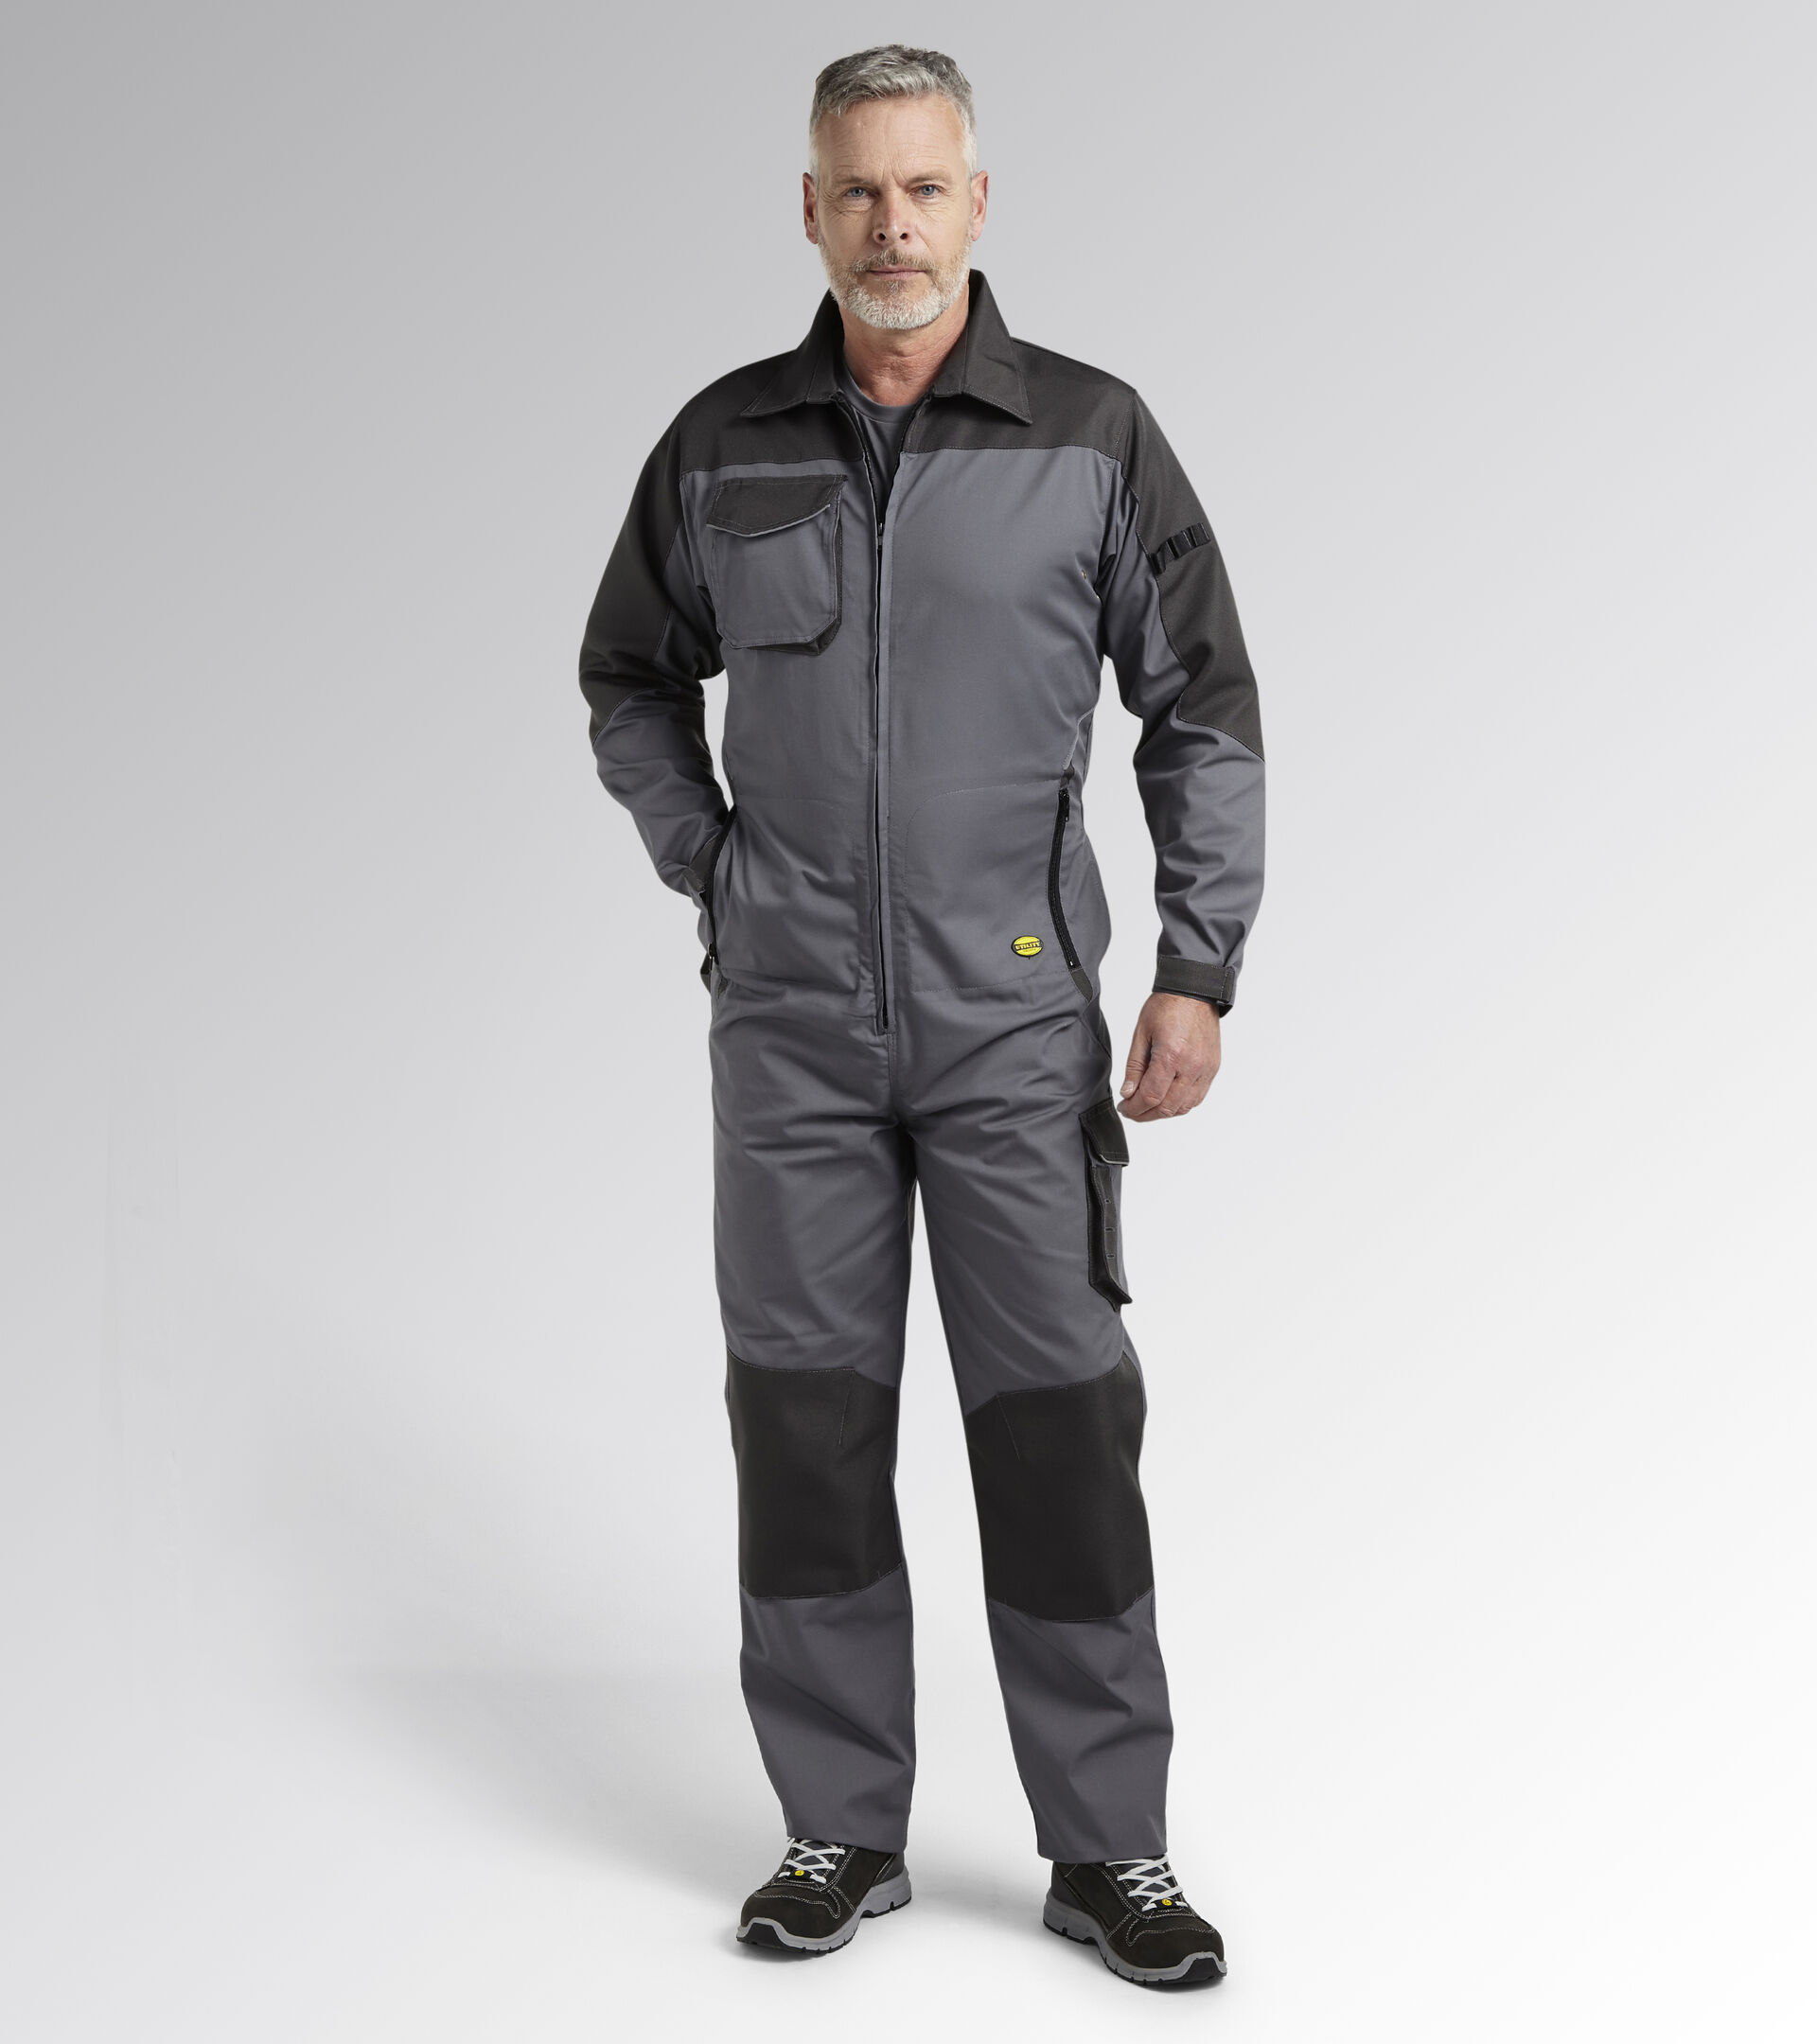 Work coveralls COVERALL POLY STEEL GRAY - Utility